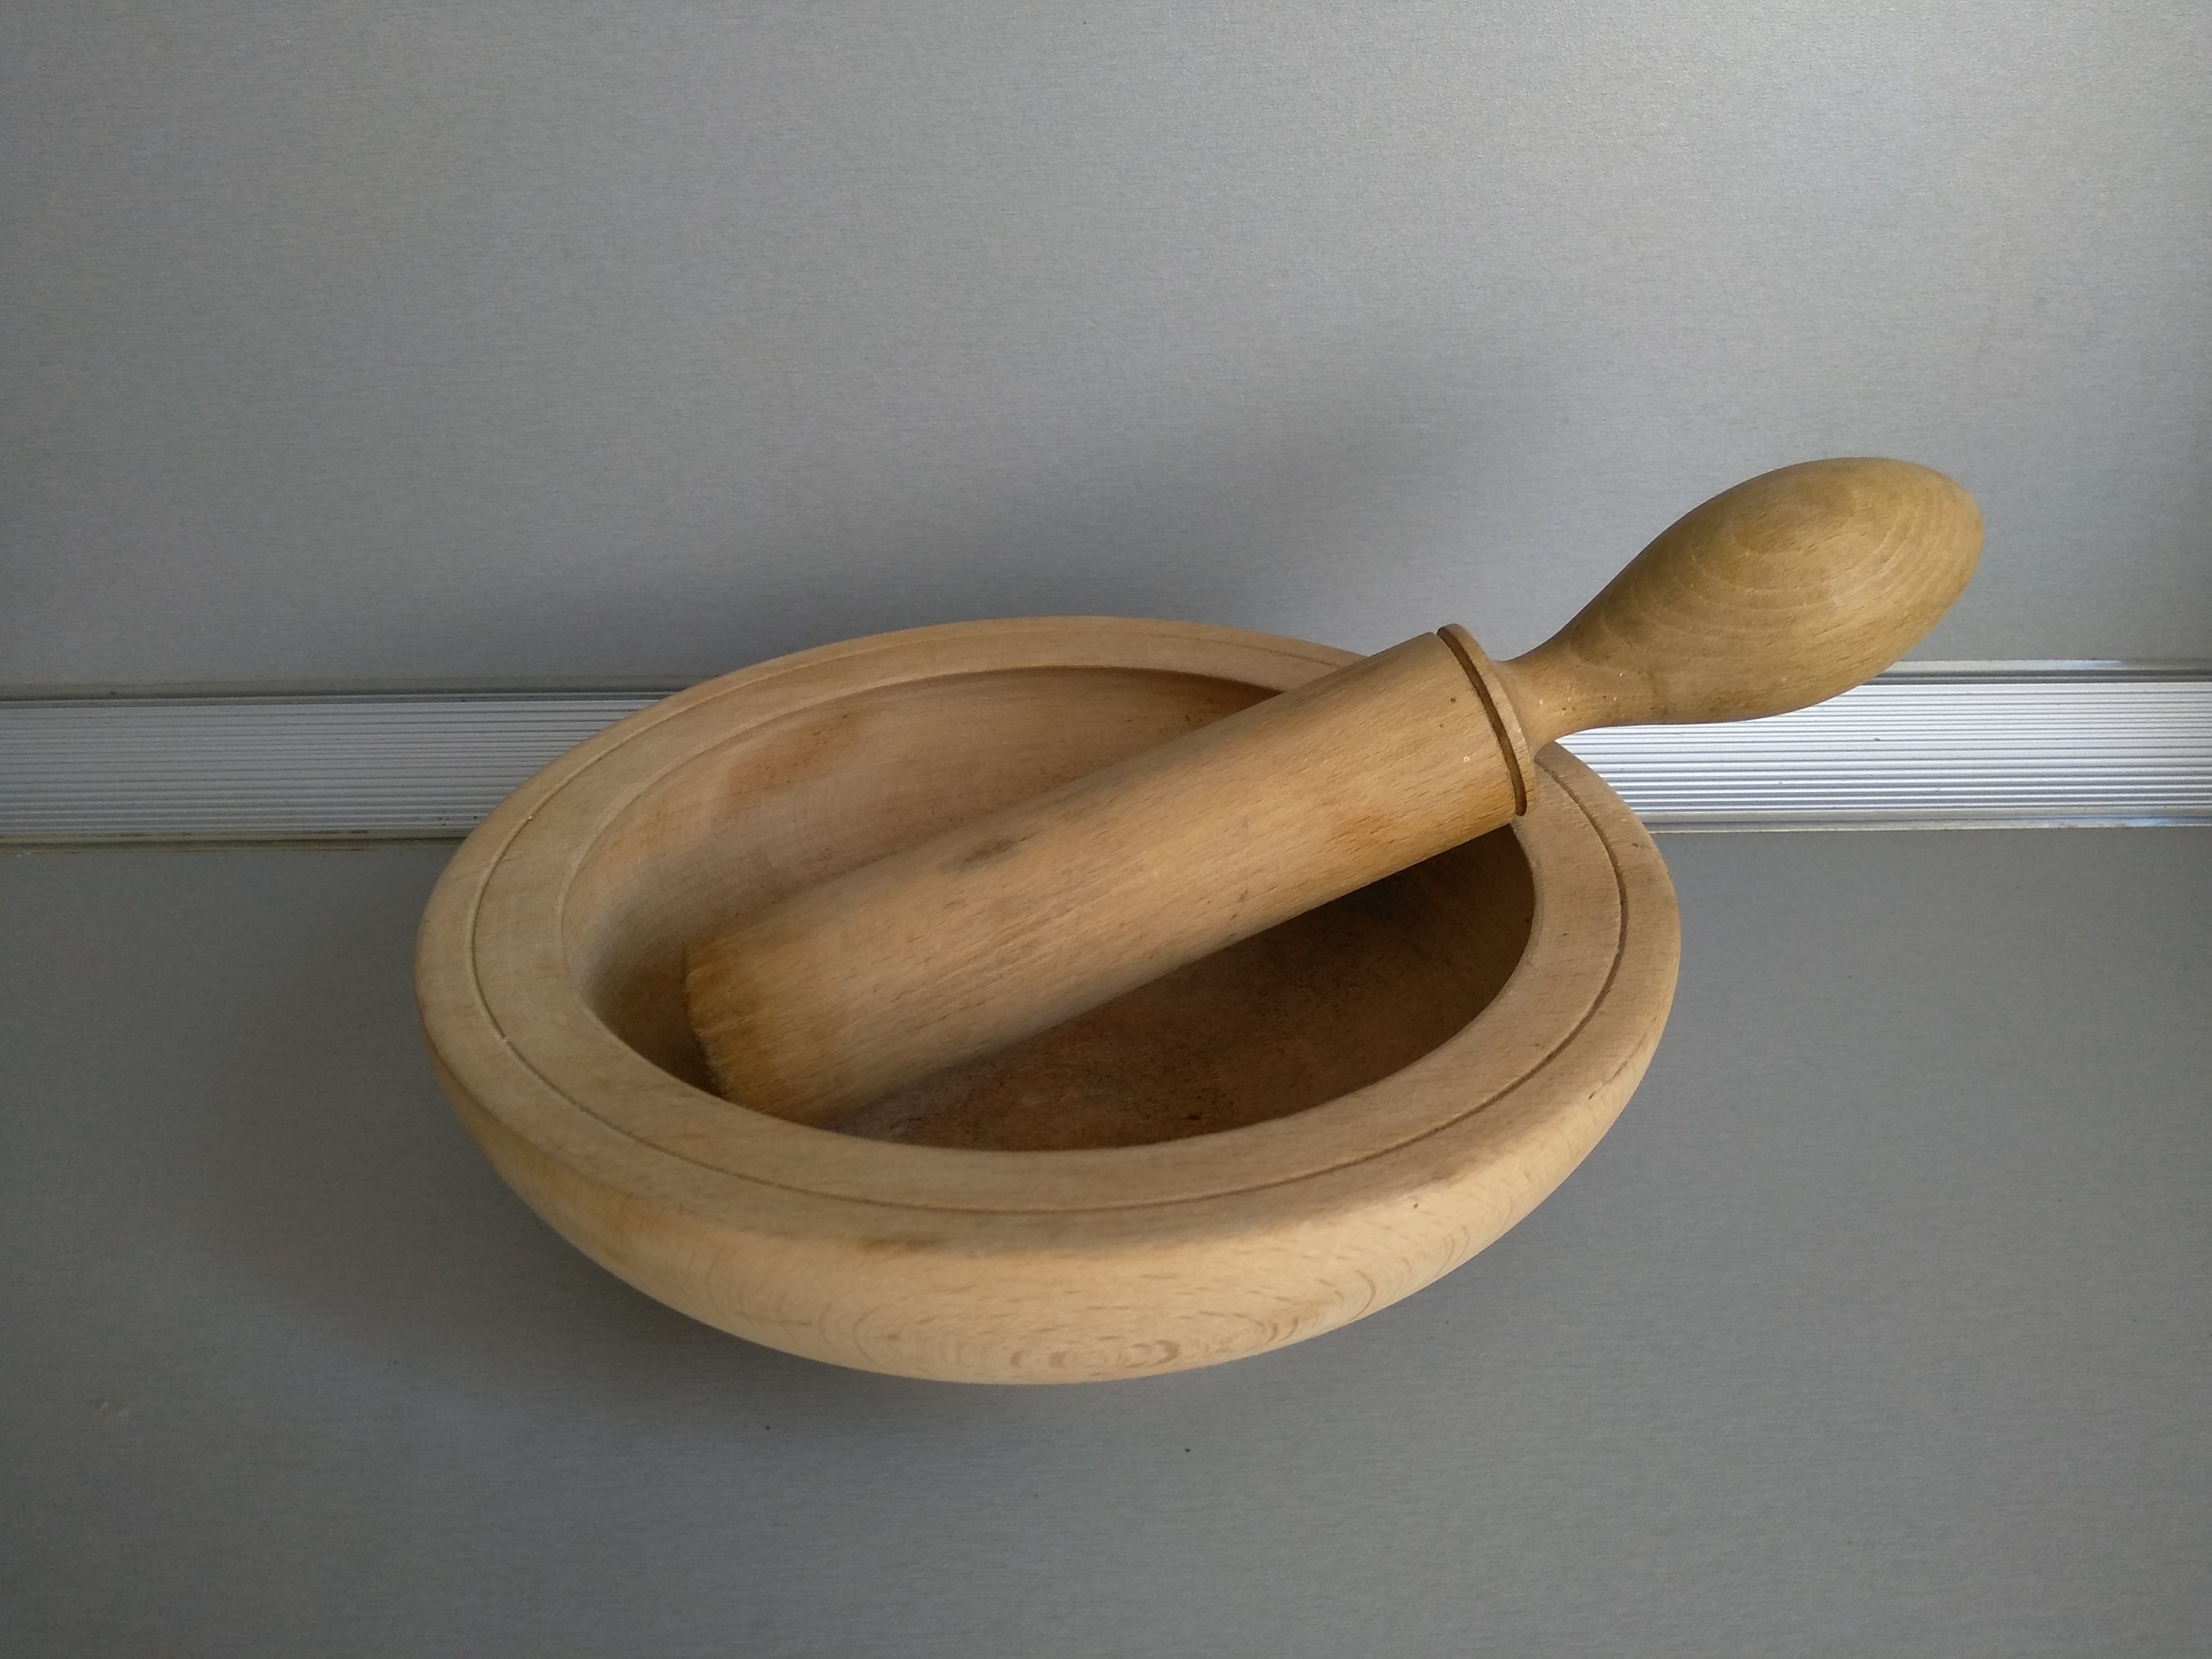 Wood chopping bowl excellent tool 🍚 kitchen table scraps 🧈